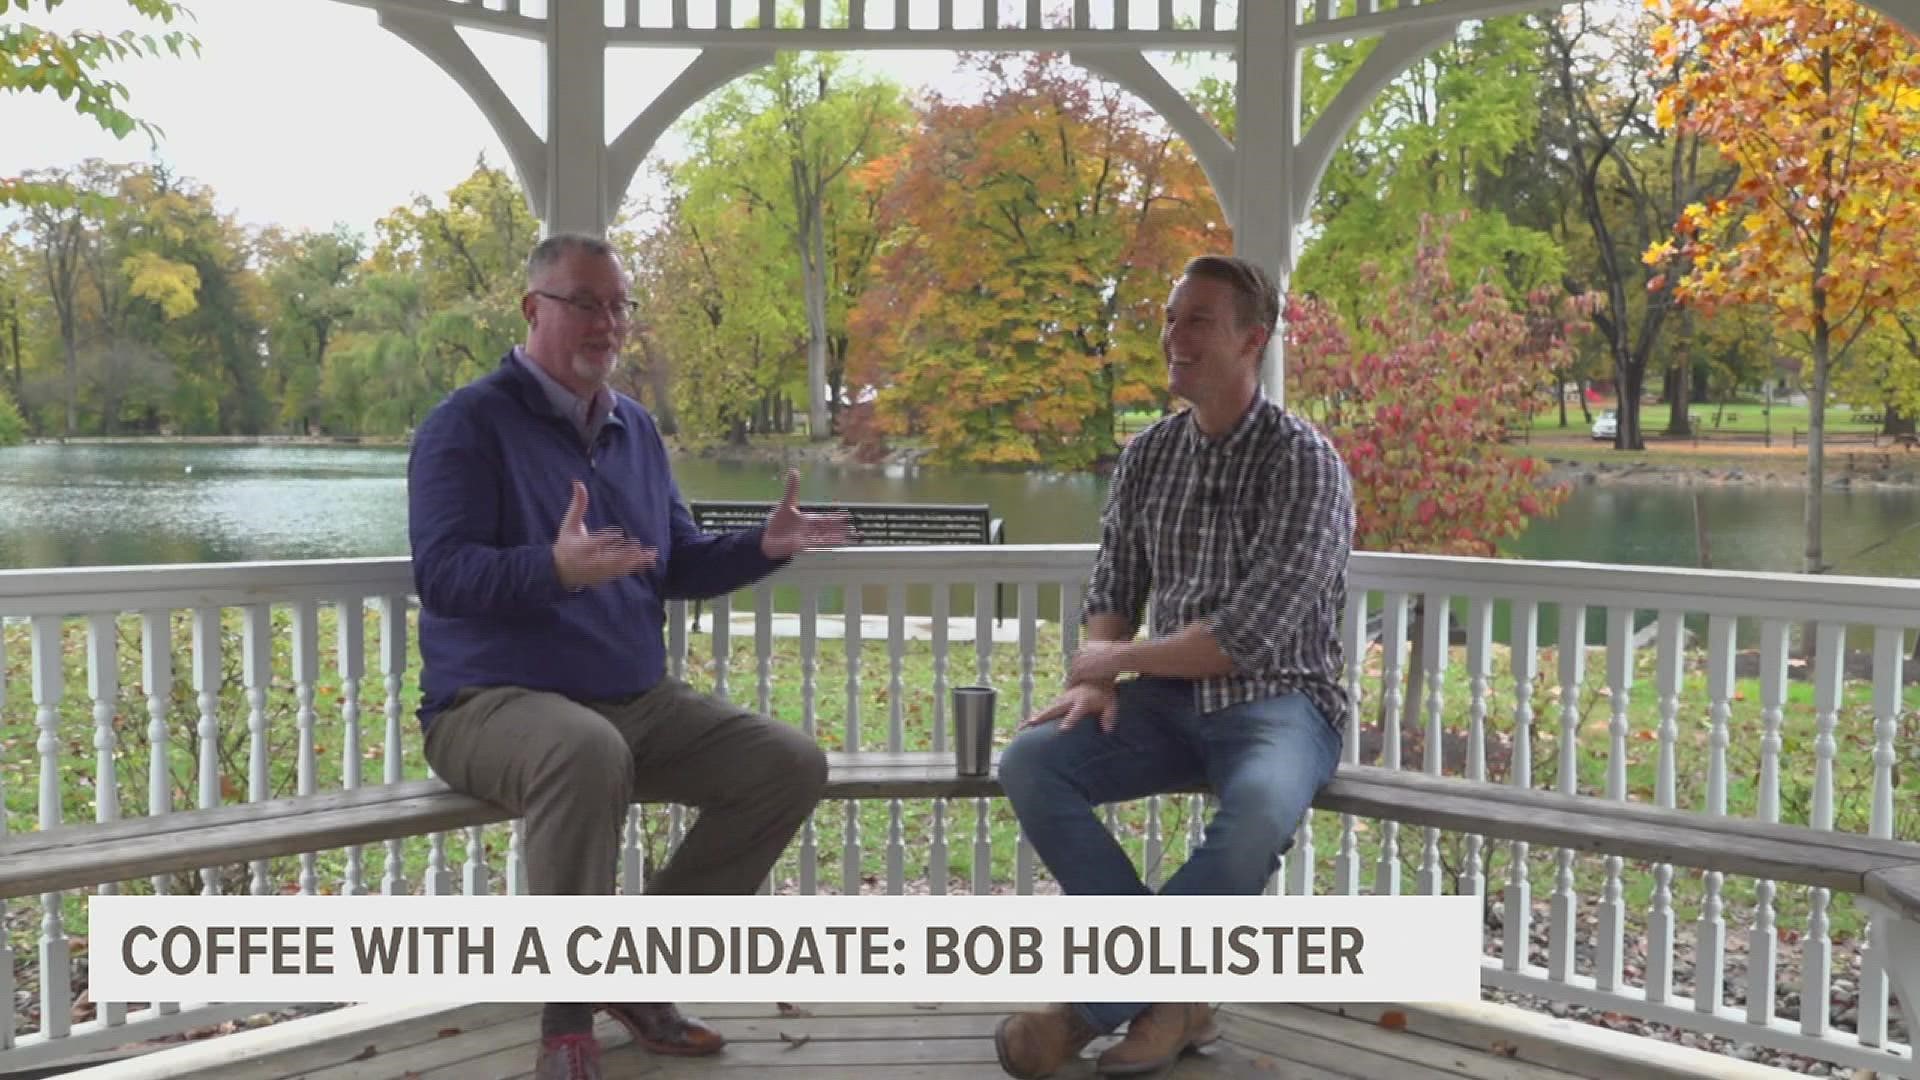 Bob Hollister is running to represent Pennsylvania's 11th congressional district in the United States Congress.